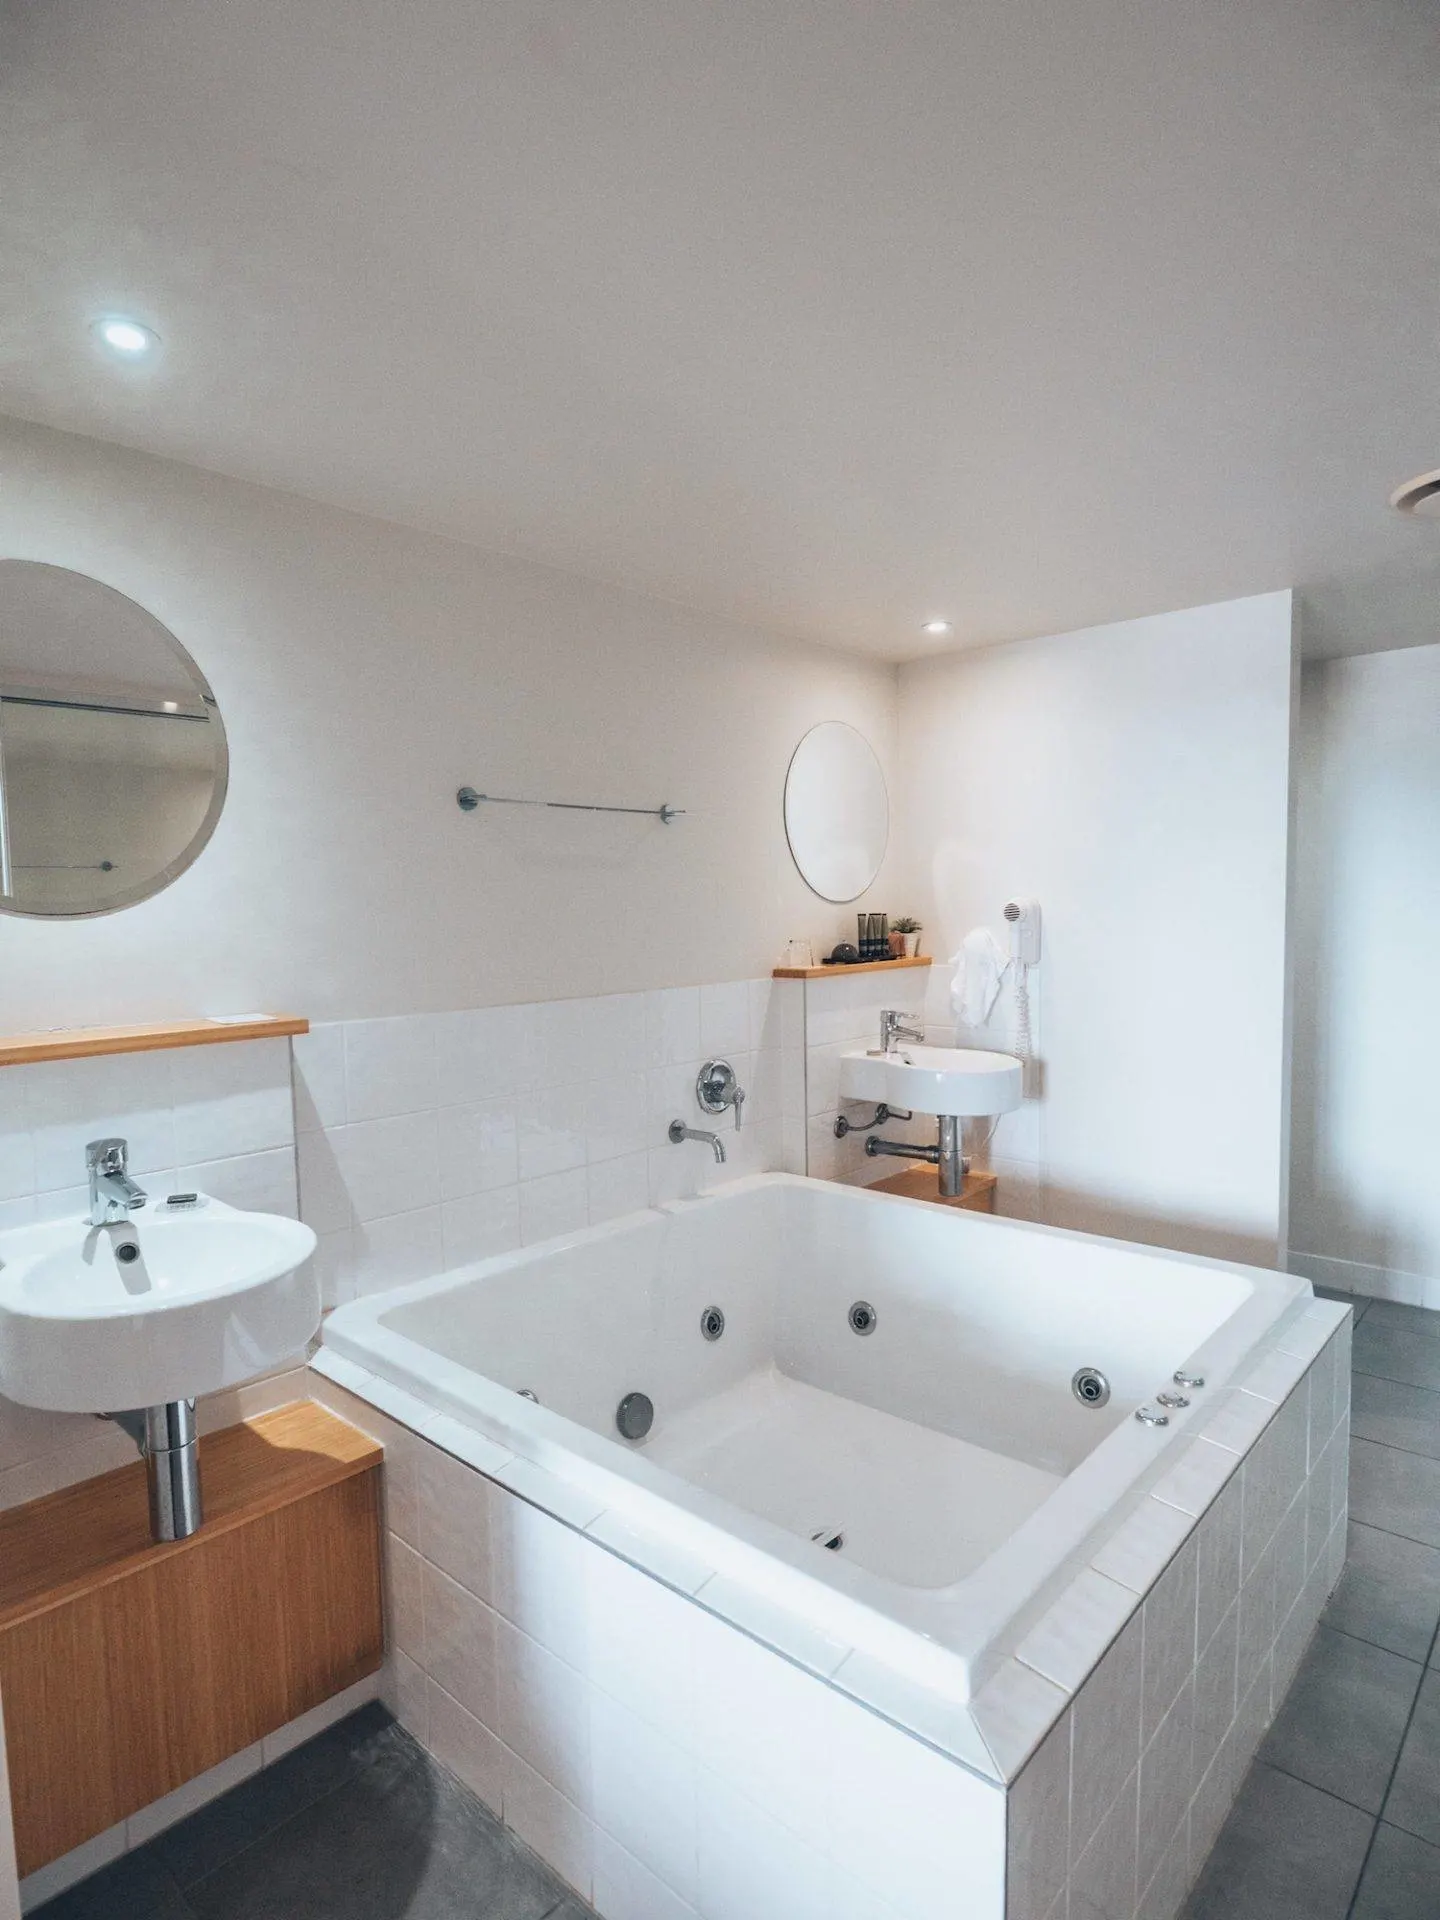 The spacious rooms at Peppers Airlie Beach were one of the reasons we loved staying at this resort. Just look at the size of this bathroom and bathtub in our suite!